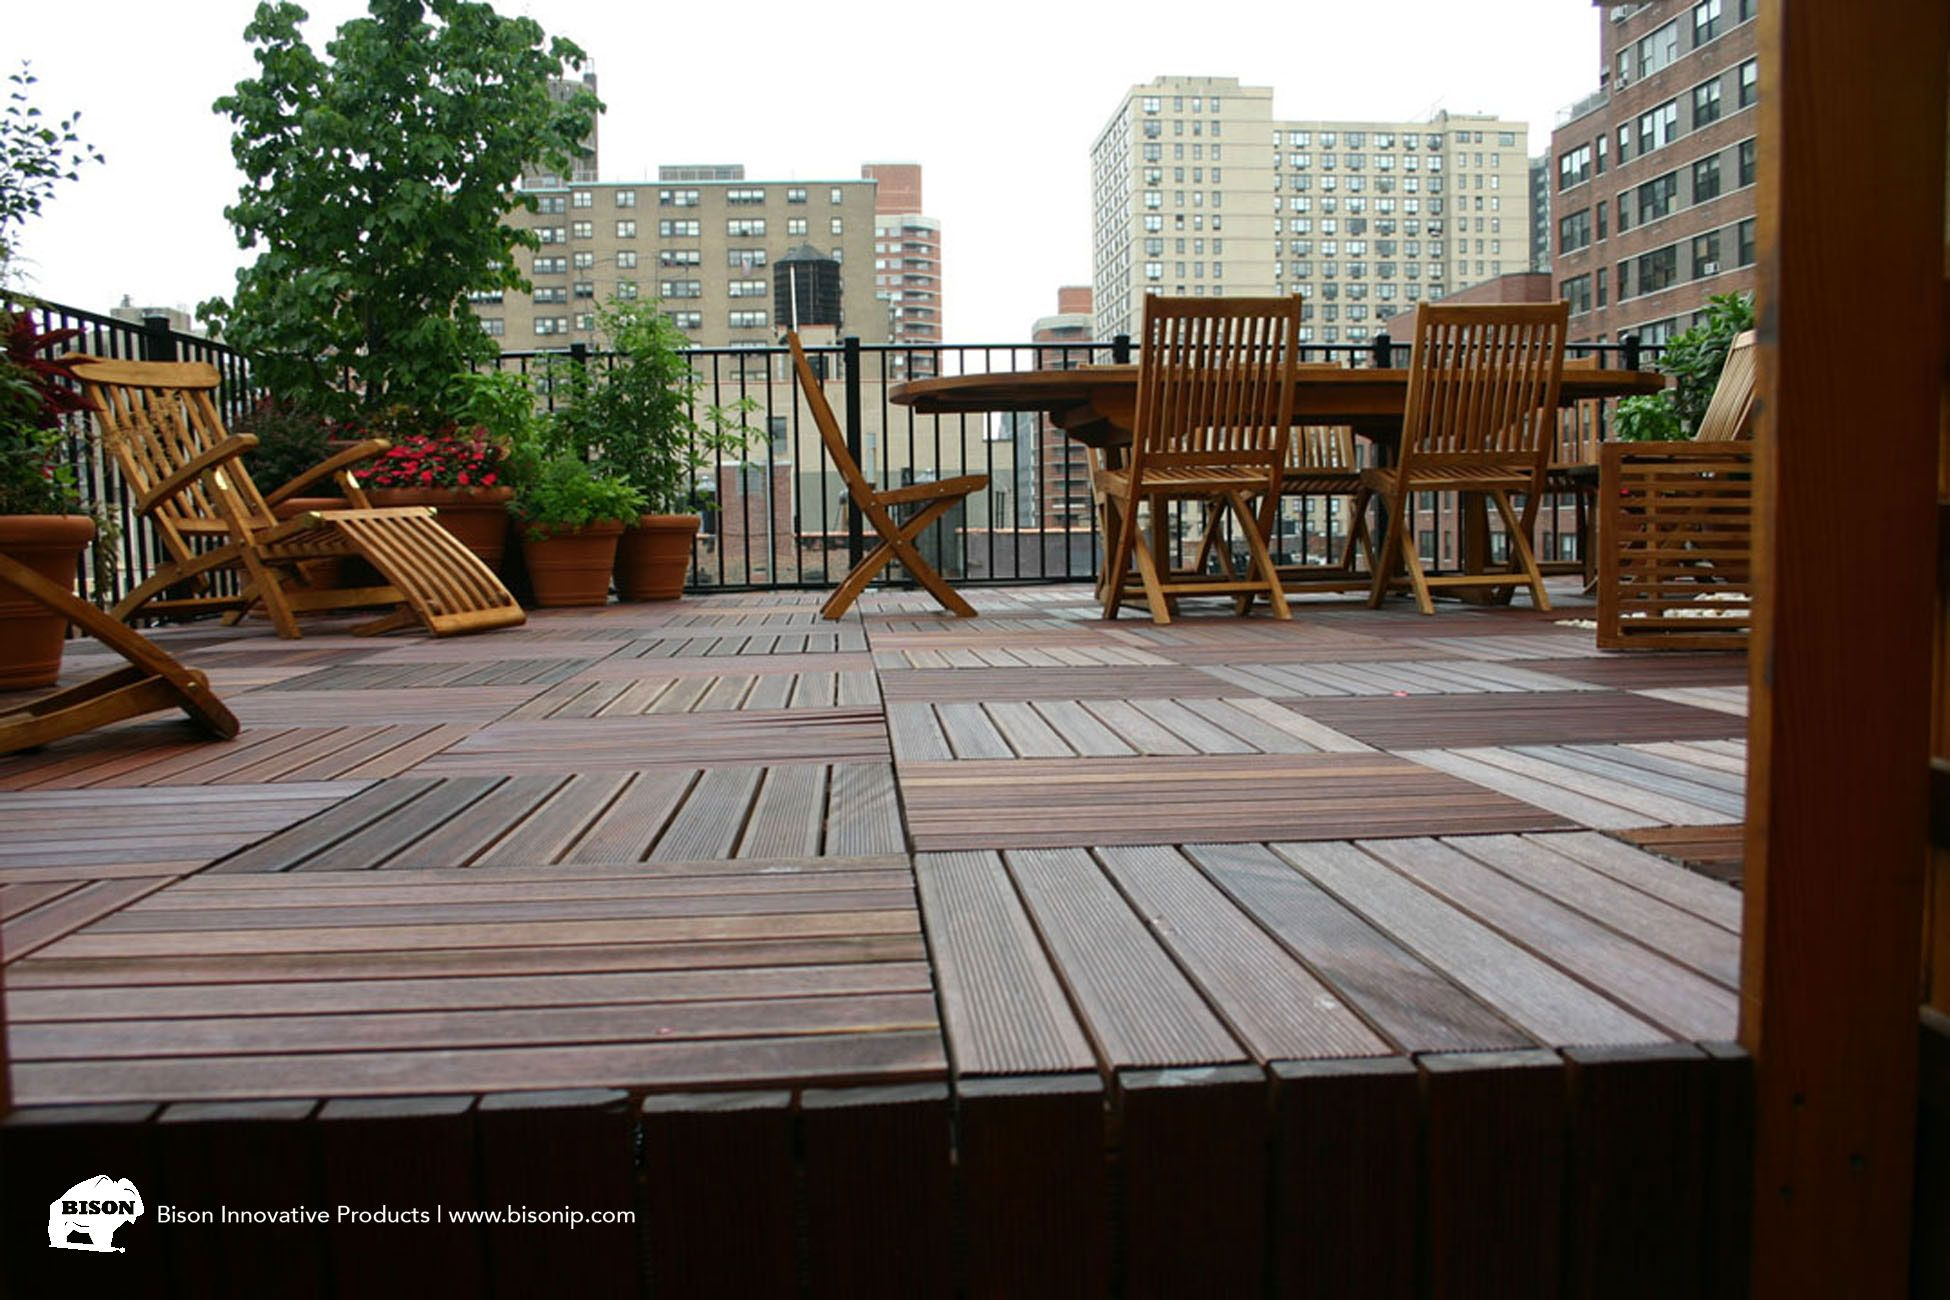 Rooftop Deck In New York Featuring Bison Innovative Products Ipe regarding size 1950 X 1300